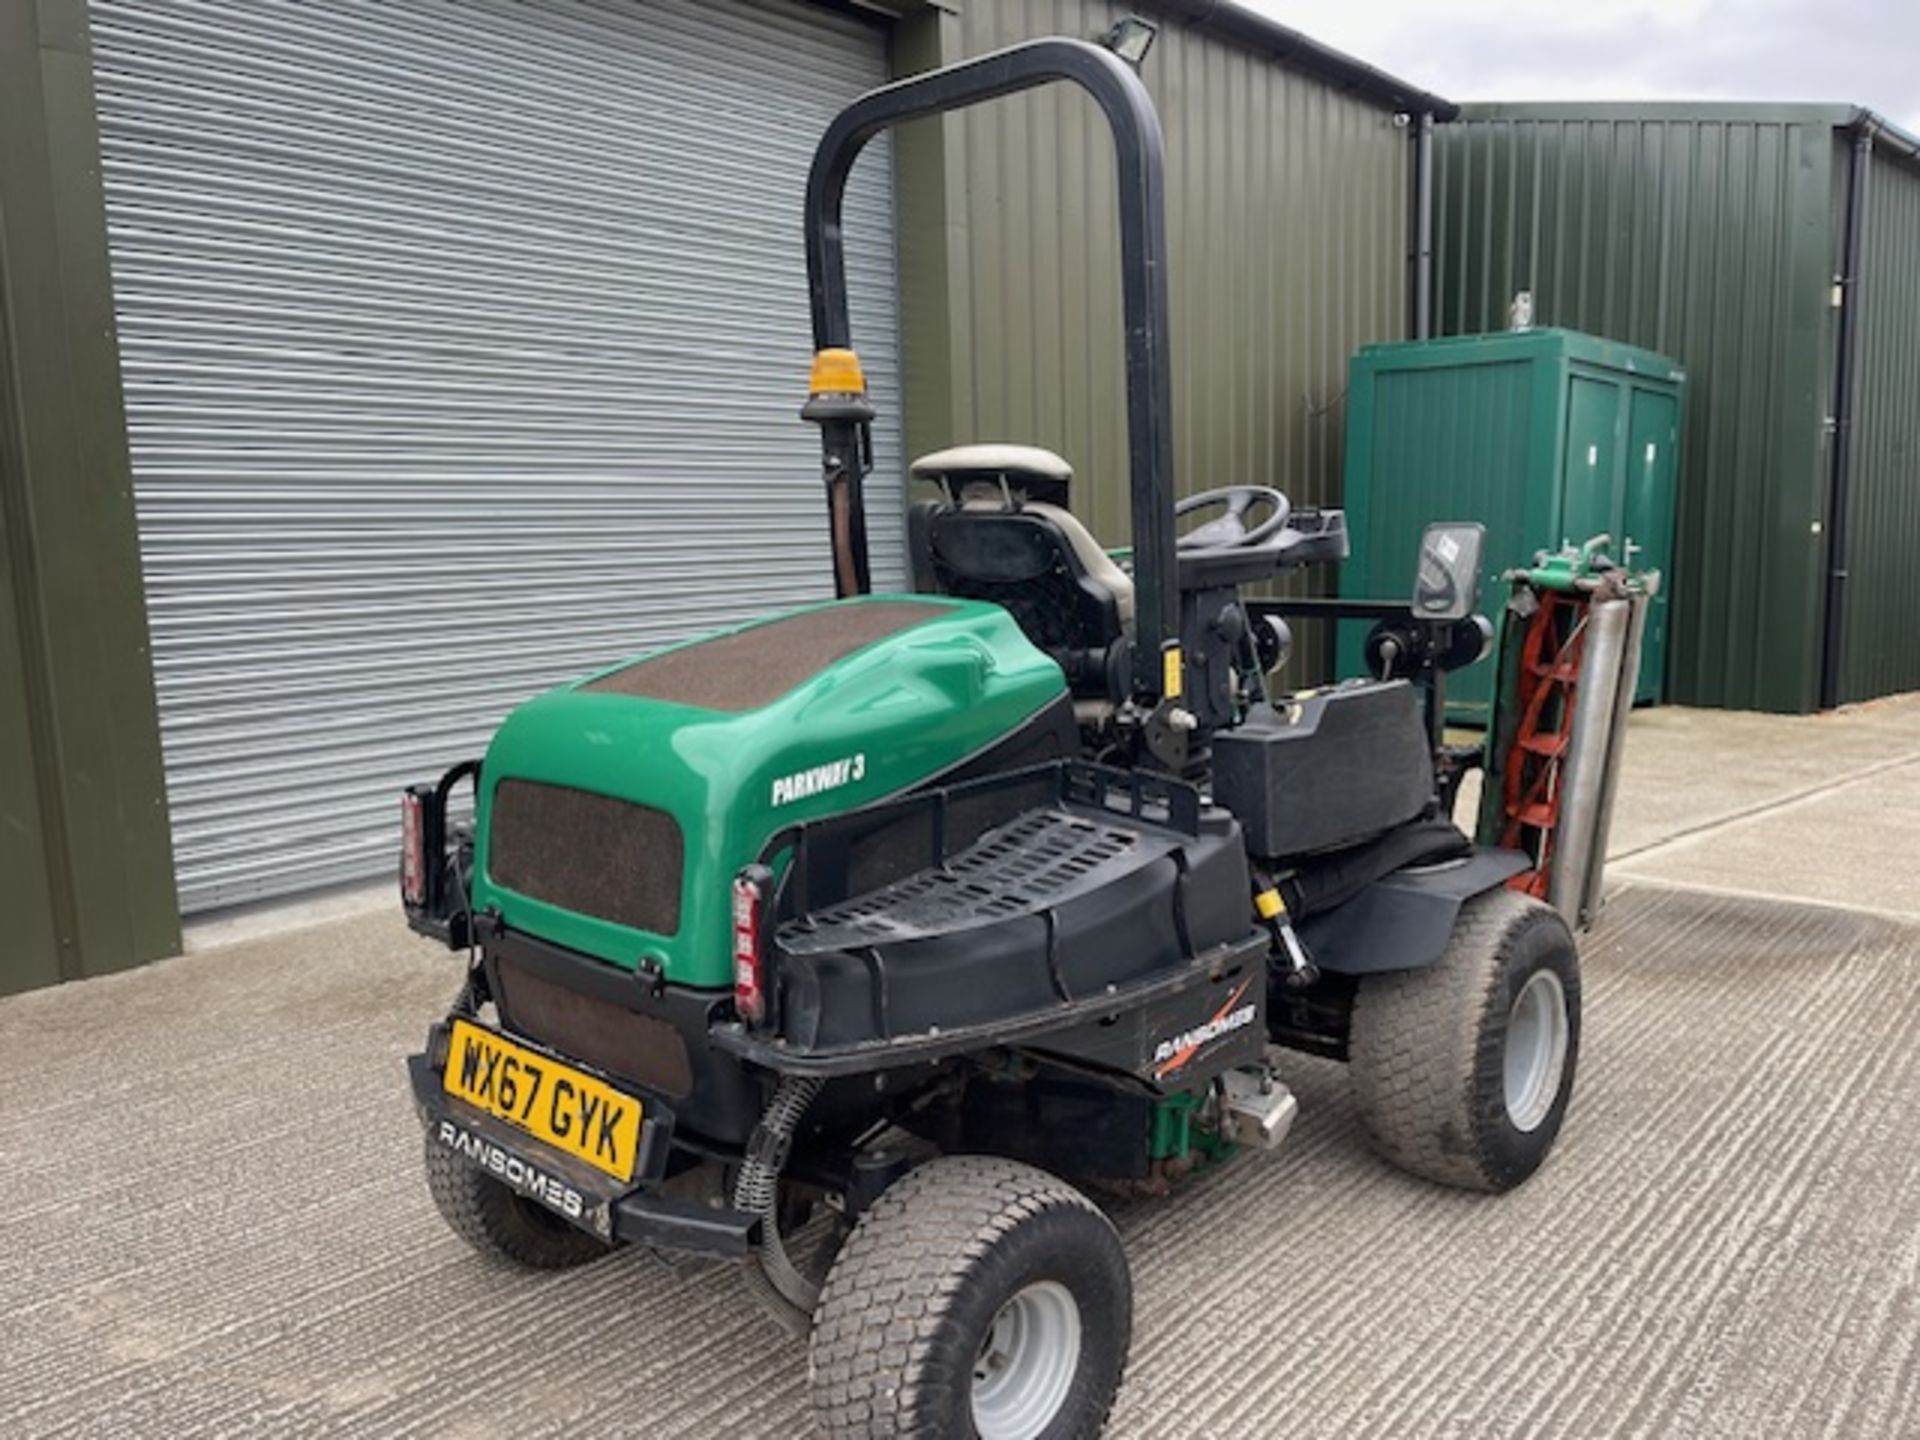 2017/2018 - RANSOMES PARKWAY 3 RIDE ON MOWER SERVICED - Image 3 of 12